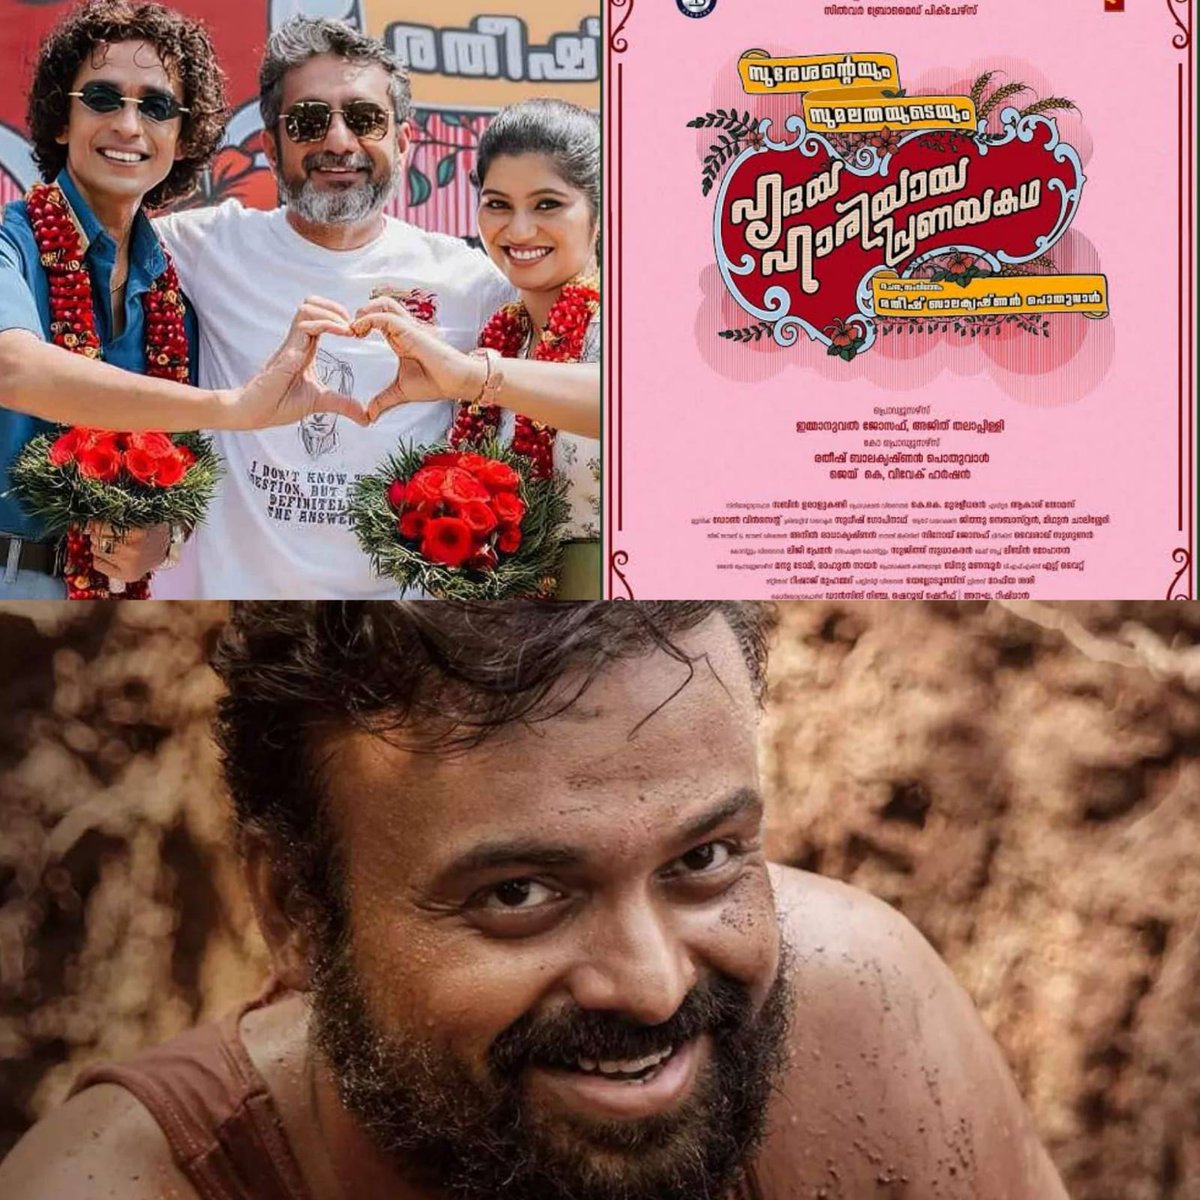 After #Nnathancasekodu, Ratheesh Balakrishna Poduval Next #Hridhayahariyayapranayakatha Shoot in Progress..

The Shooting of the Film, Which Was Planned for 100days, has been Completed almost 60days..

#KunchackoBoban also plays the role of Kozhumel Rajeevan in a cameo appearance